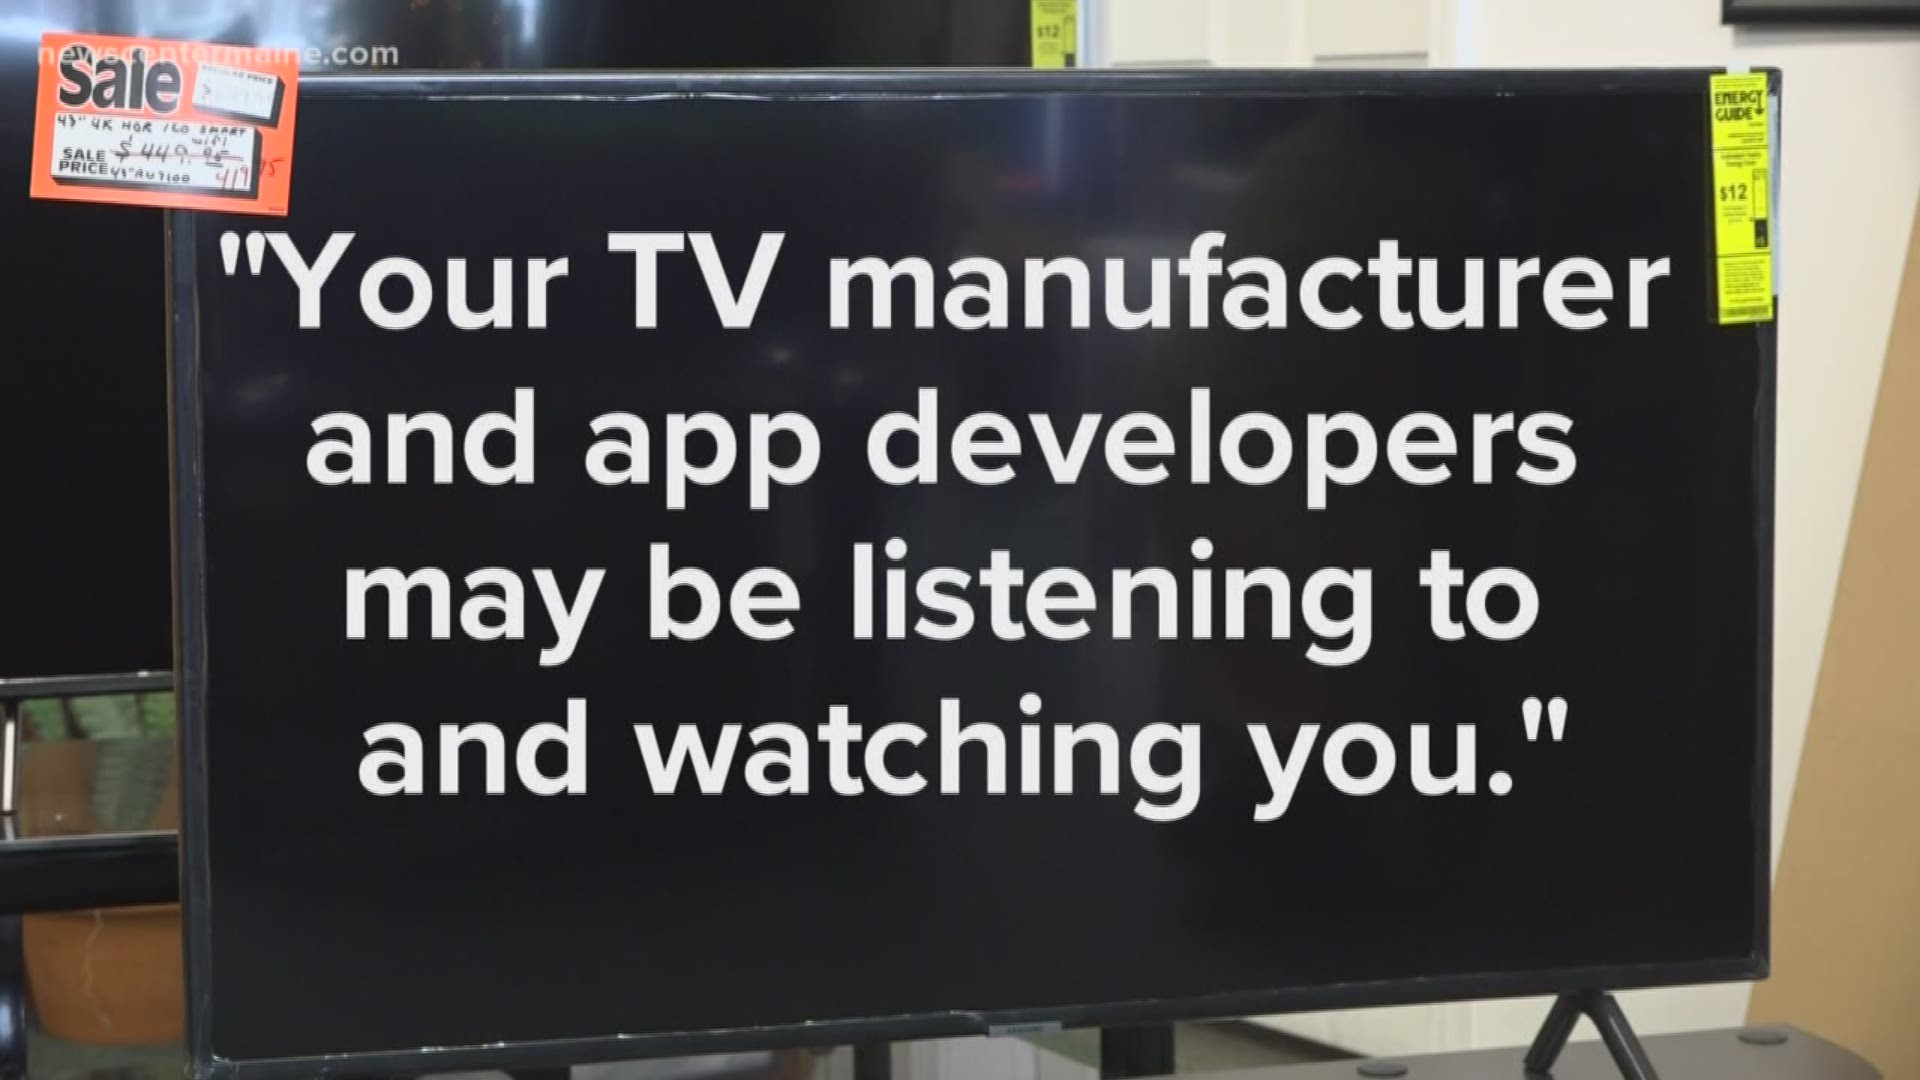 The FBI recently advised holiday shoppers to think about cybersecurity while using smart TVs.